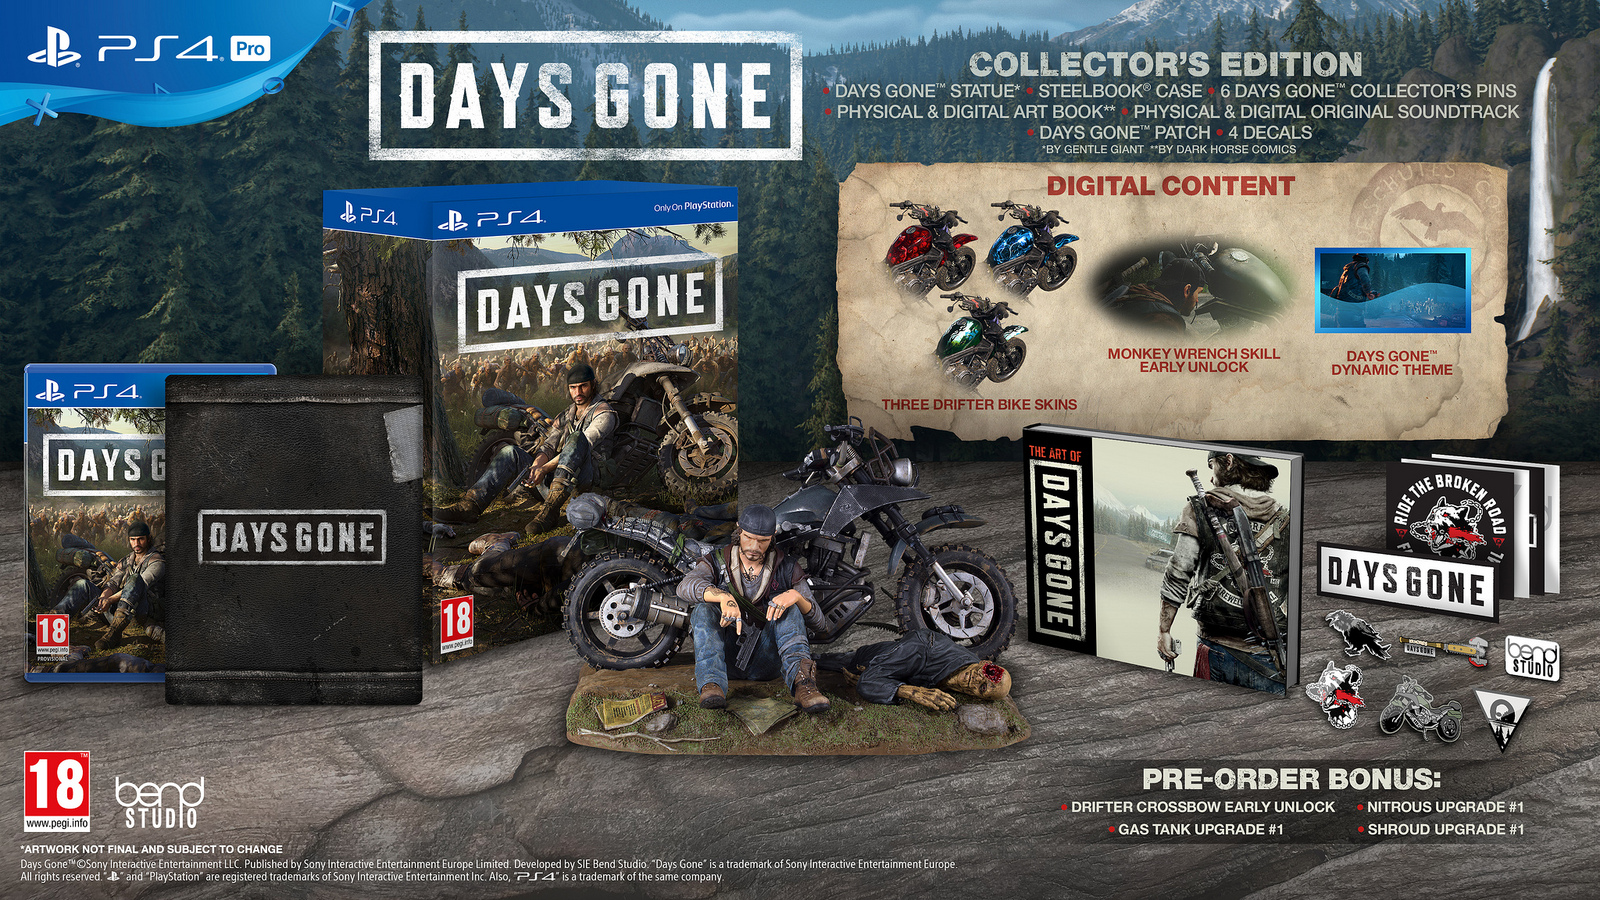 First Days Gone PC Gameplay Released; Launches Next Month on May 18th